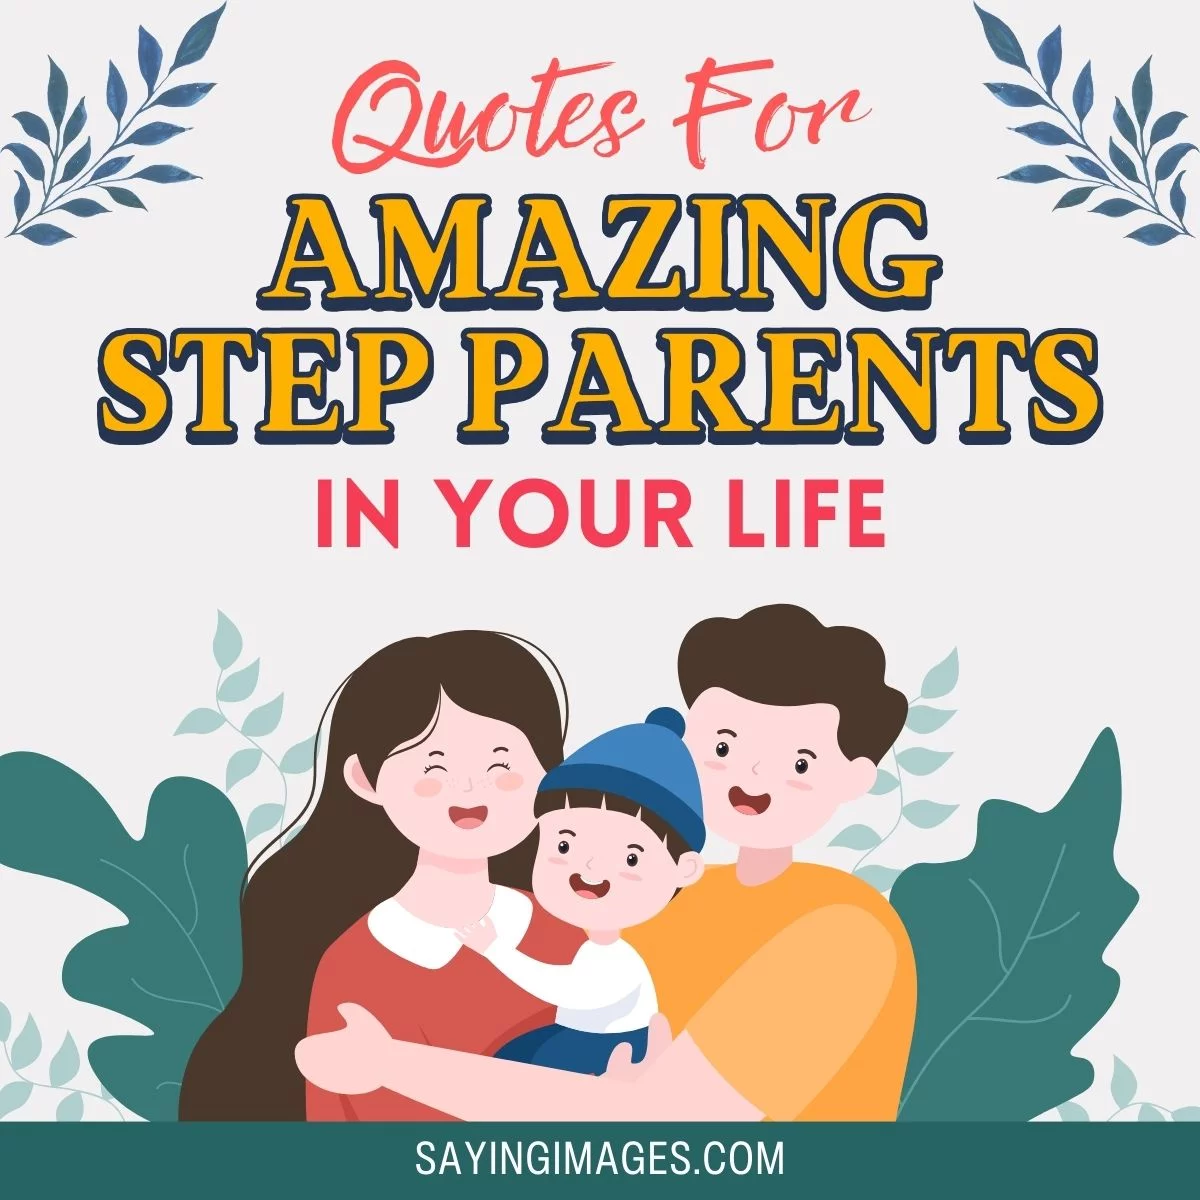 Quotes for Amazing Step Parents